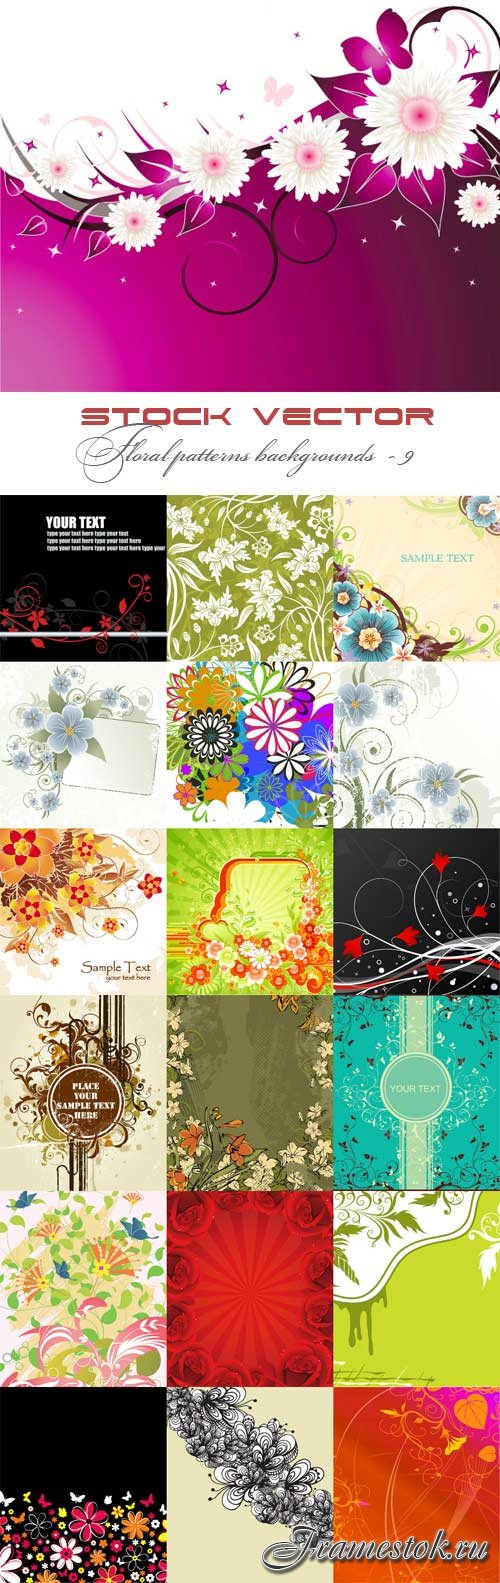 Floral patterns backgrounds stock vector - 9